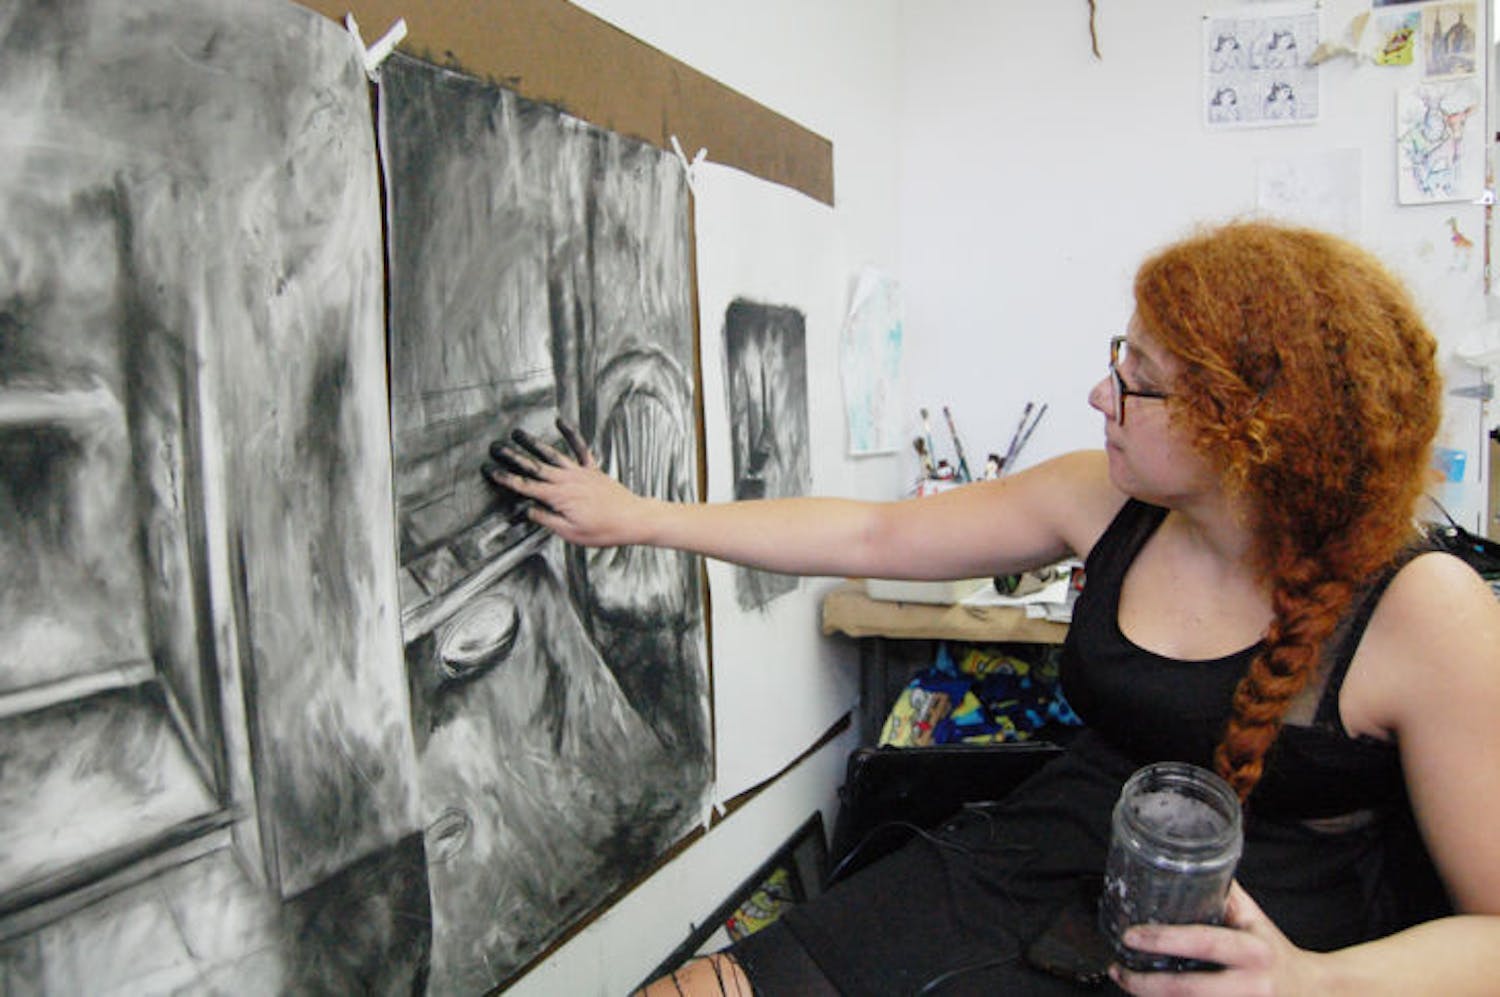 Dounia Bendris, a 21-year-old UF drawing senior, doesn’t like hard lines in her work, so she uses her fingers to smear her charcoal drawings. With black-stained hands, her fingerprints create a shadow and light effect. She dips her fingers into a water jug to seal the charcoal when she’s satisfied with an area.&nbsp;